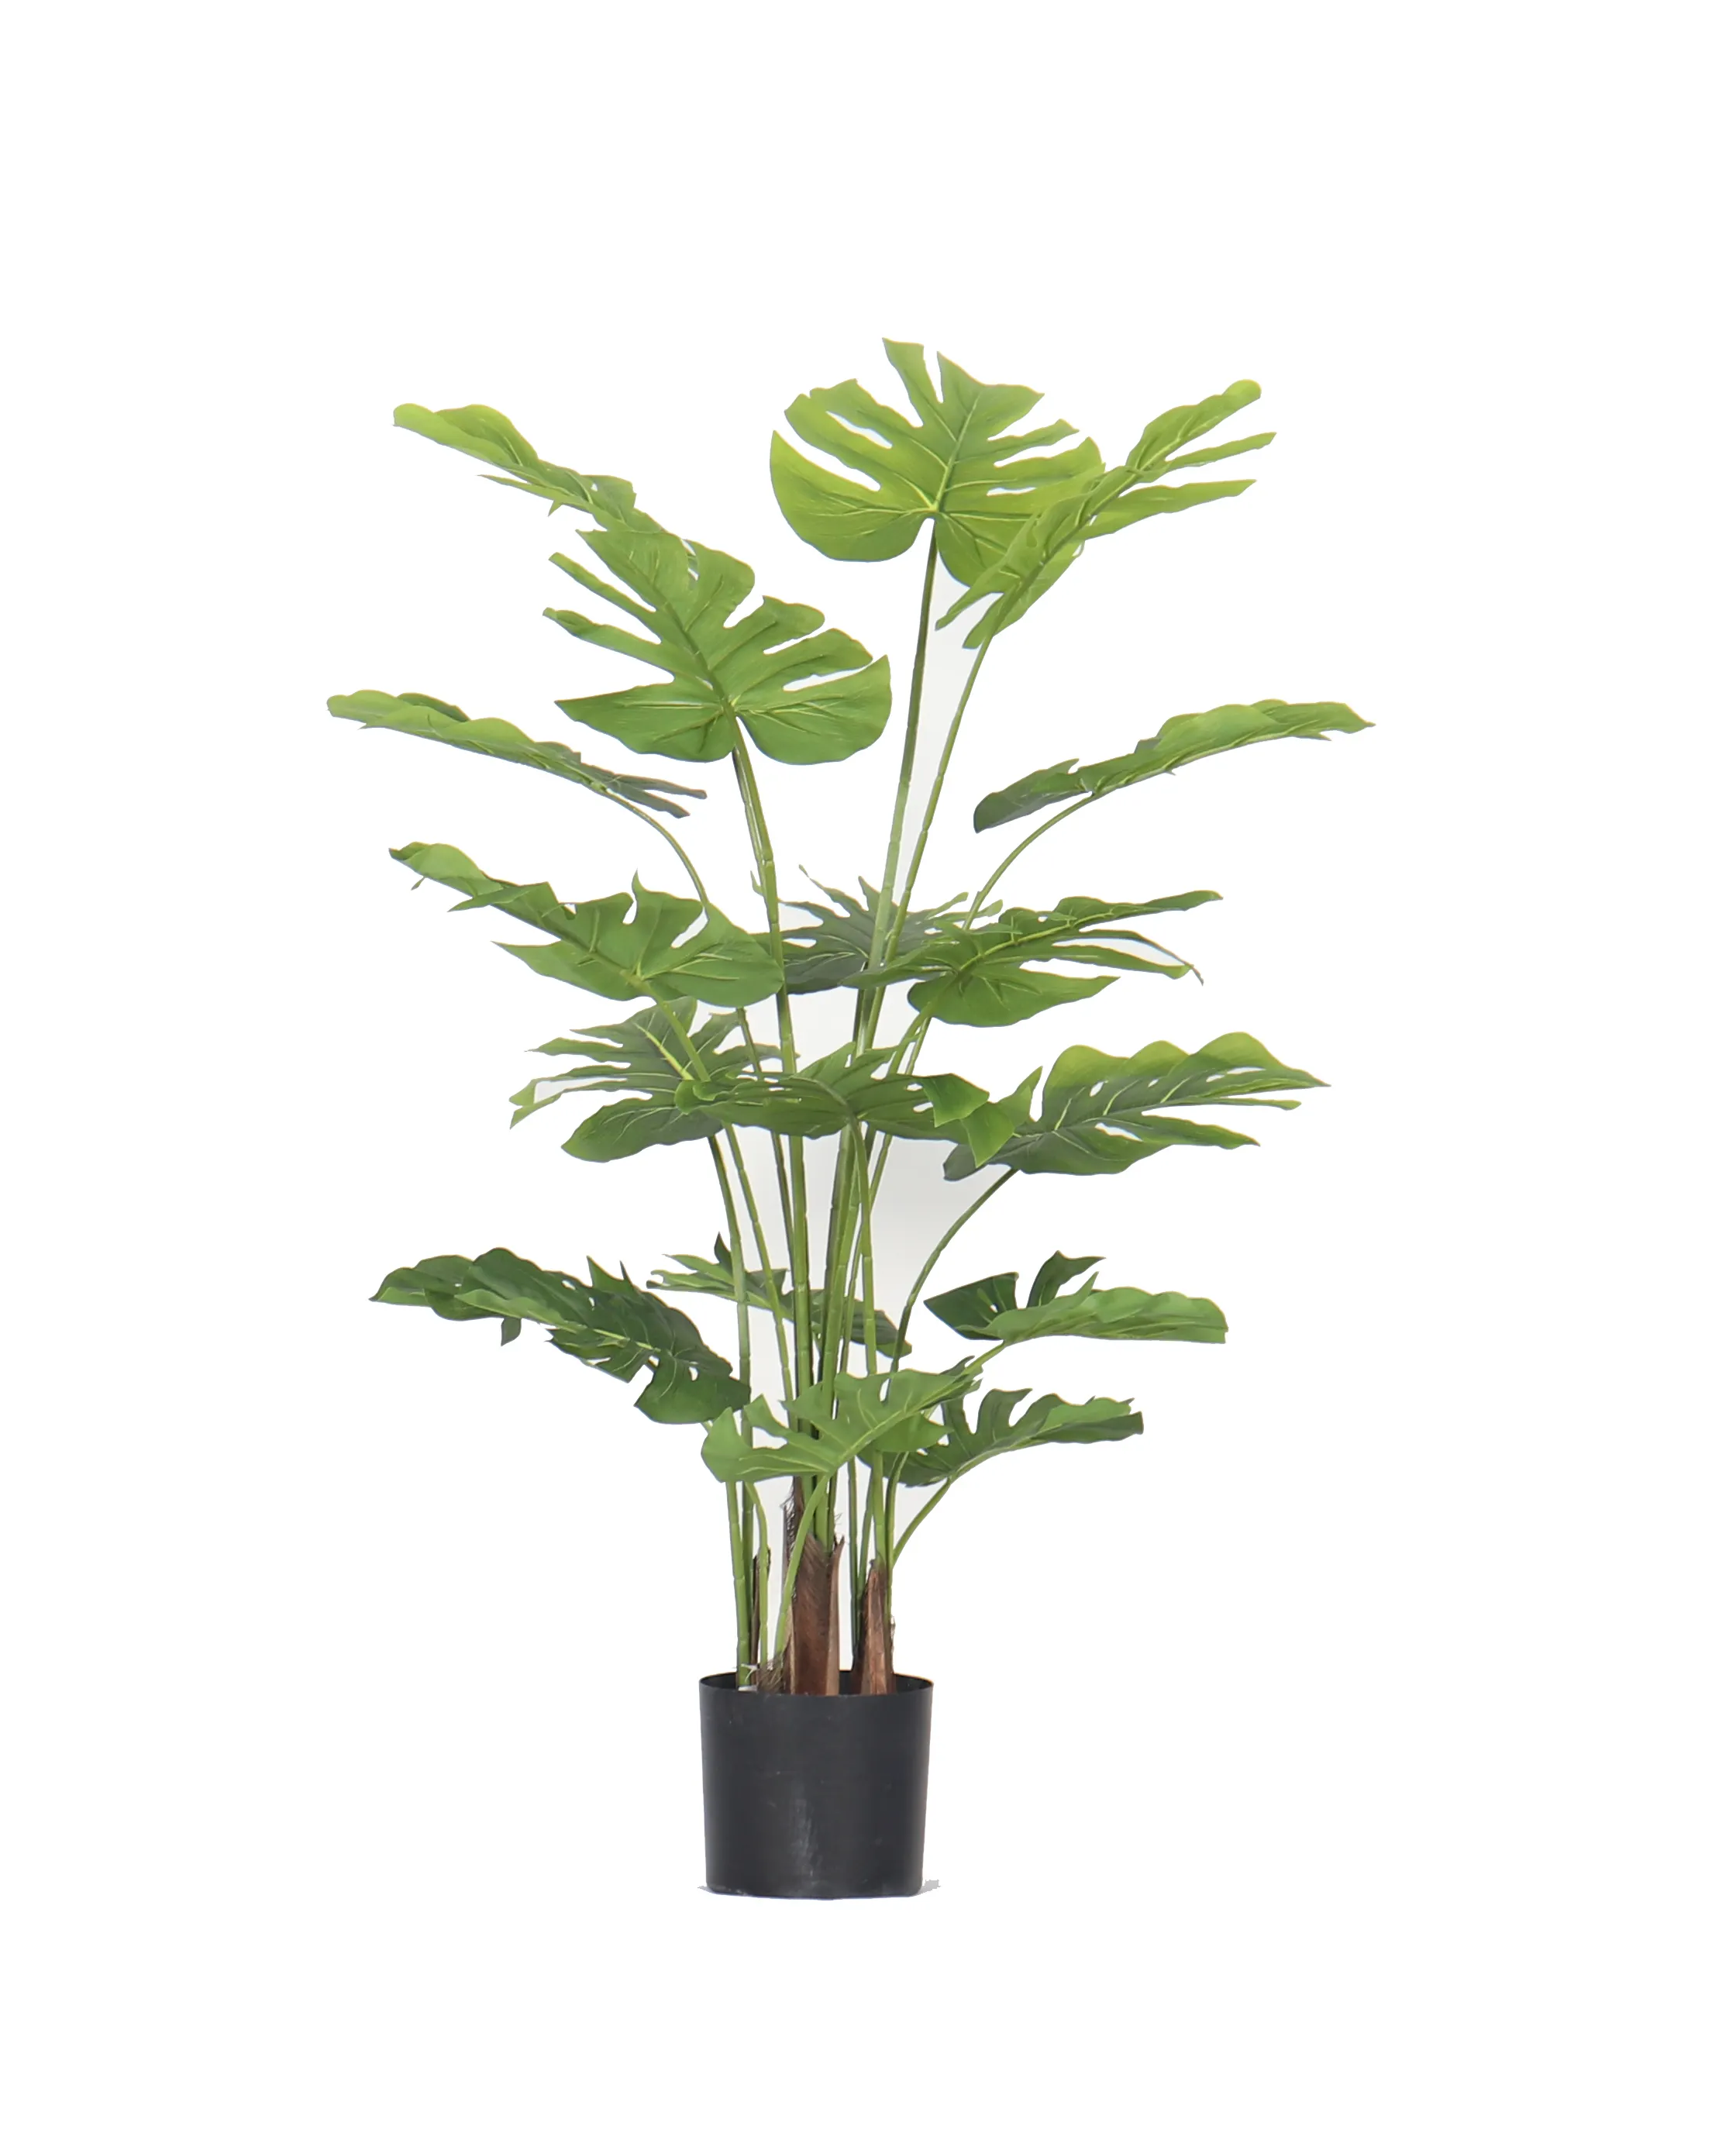 7047 wholesale plastic fake potted plants artificial green tree fake indoor plants monstera tree for home decor